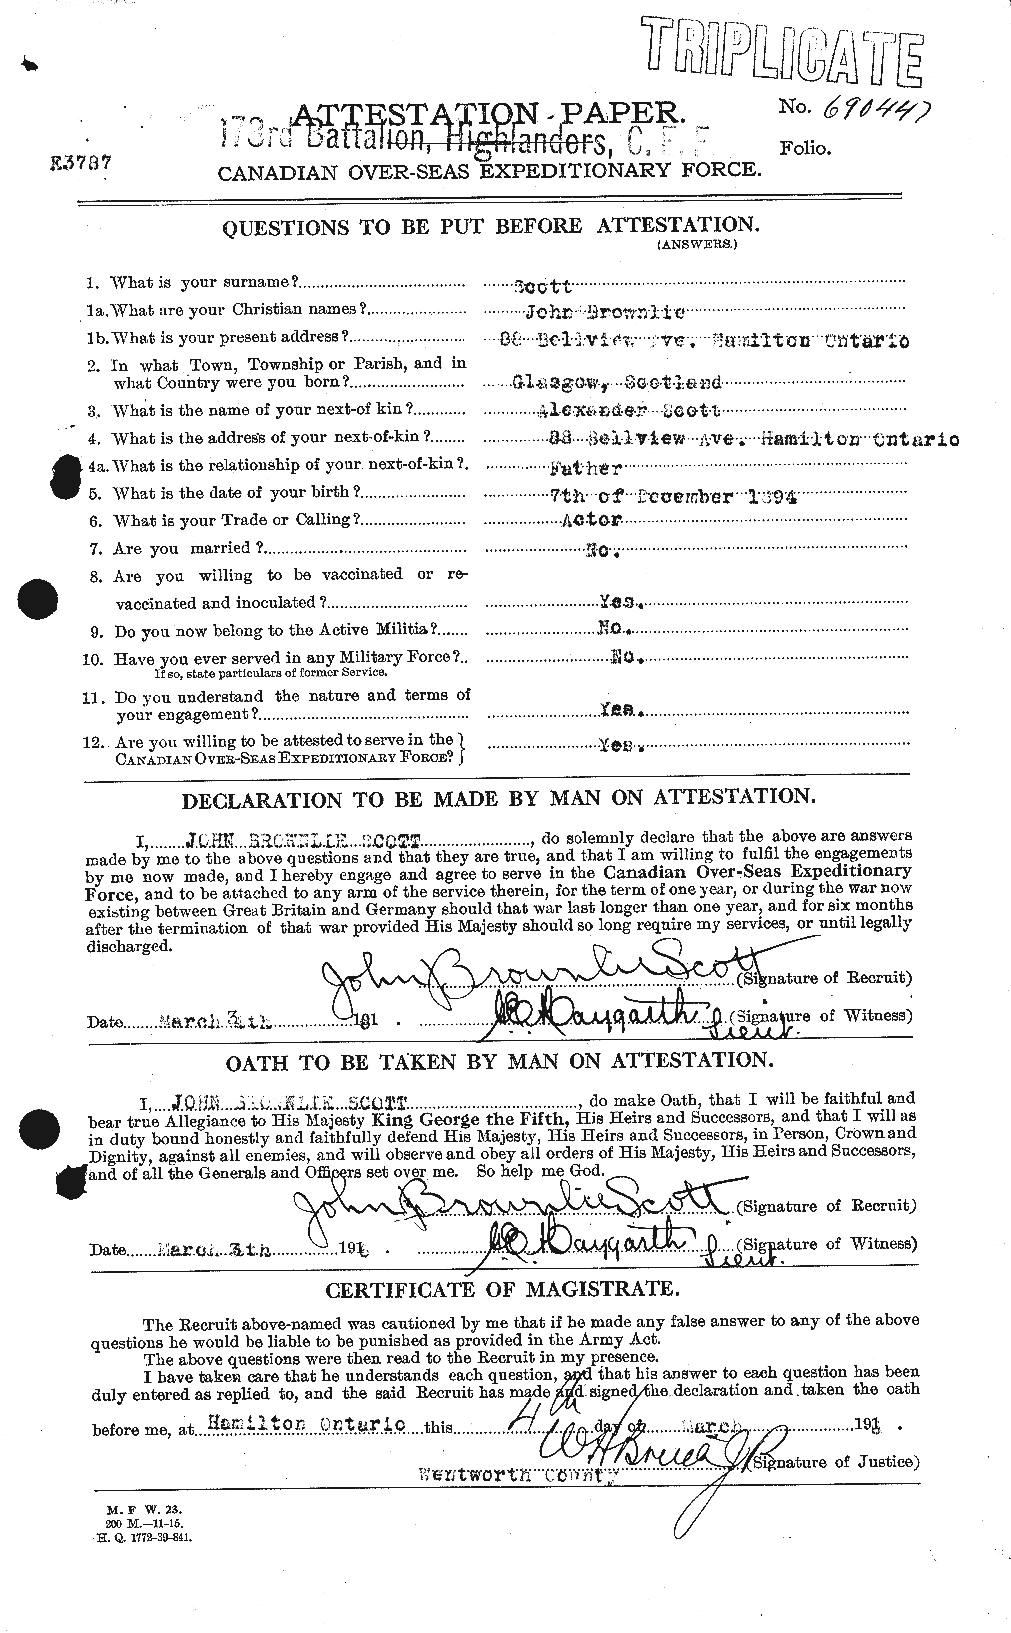 Personnel Records of the First World War - CEF 084654a